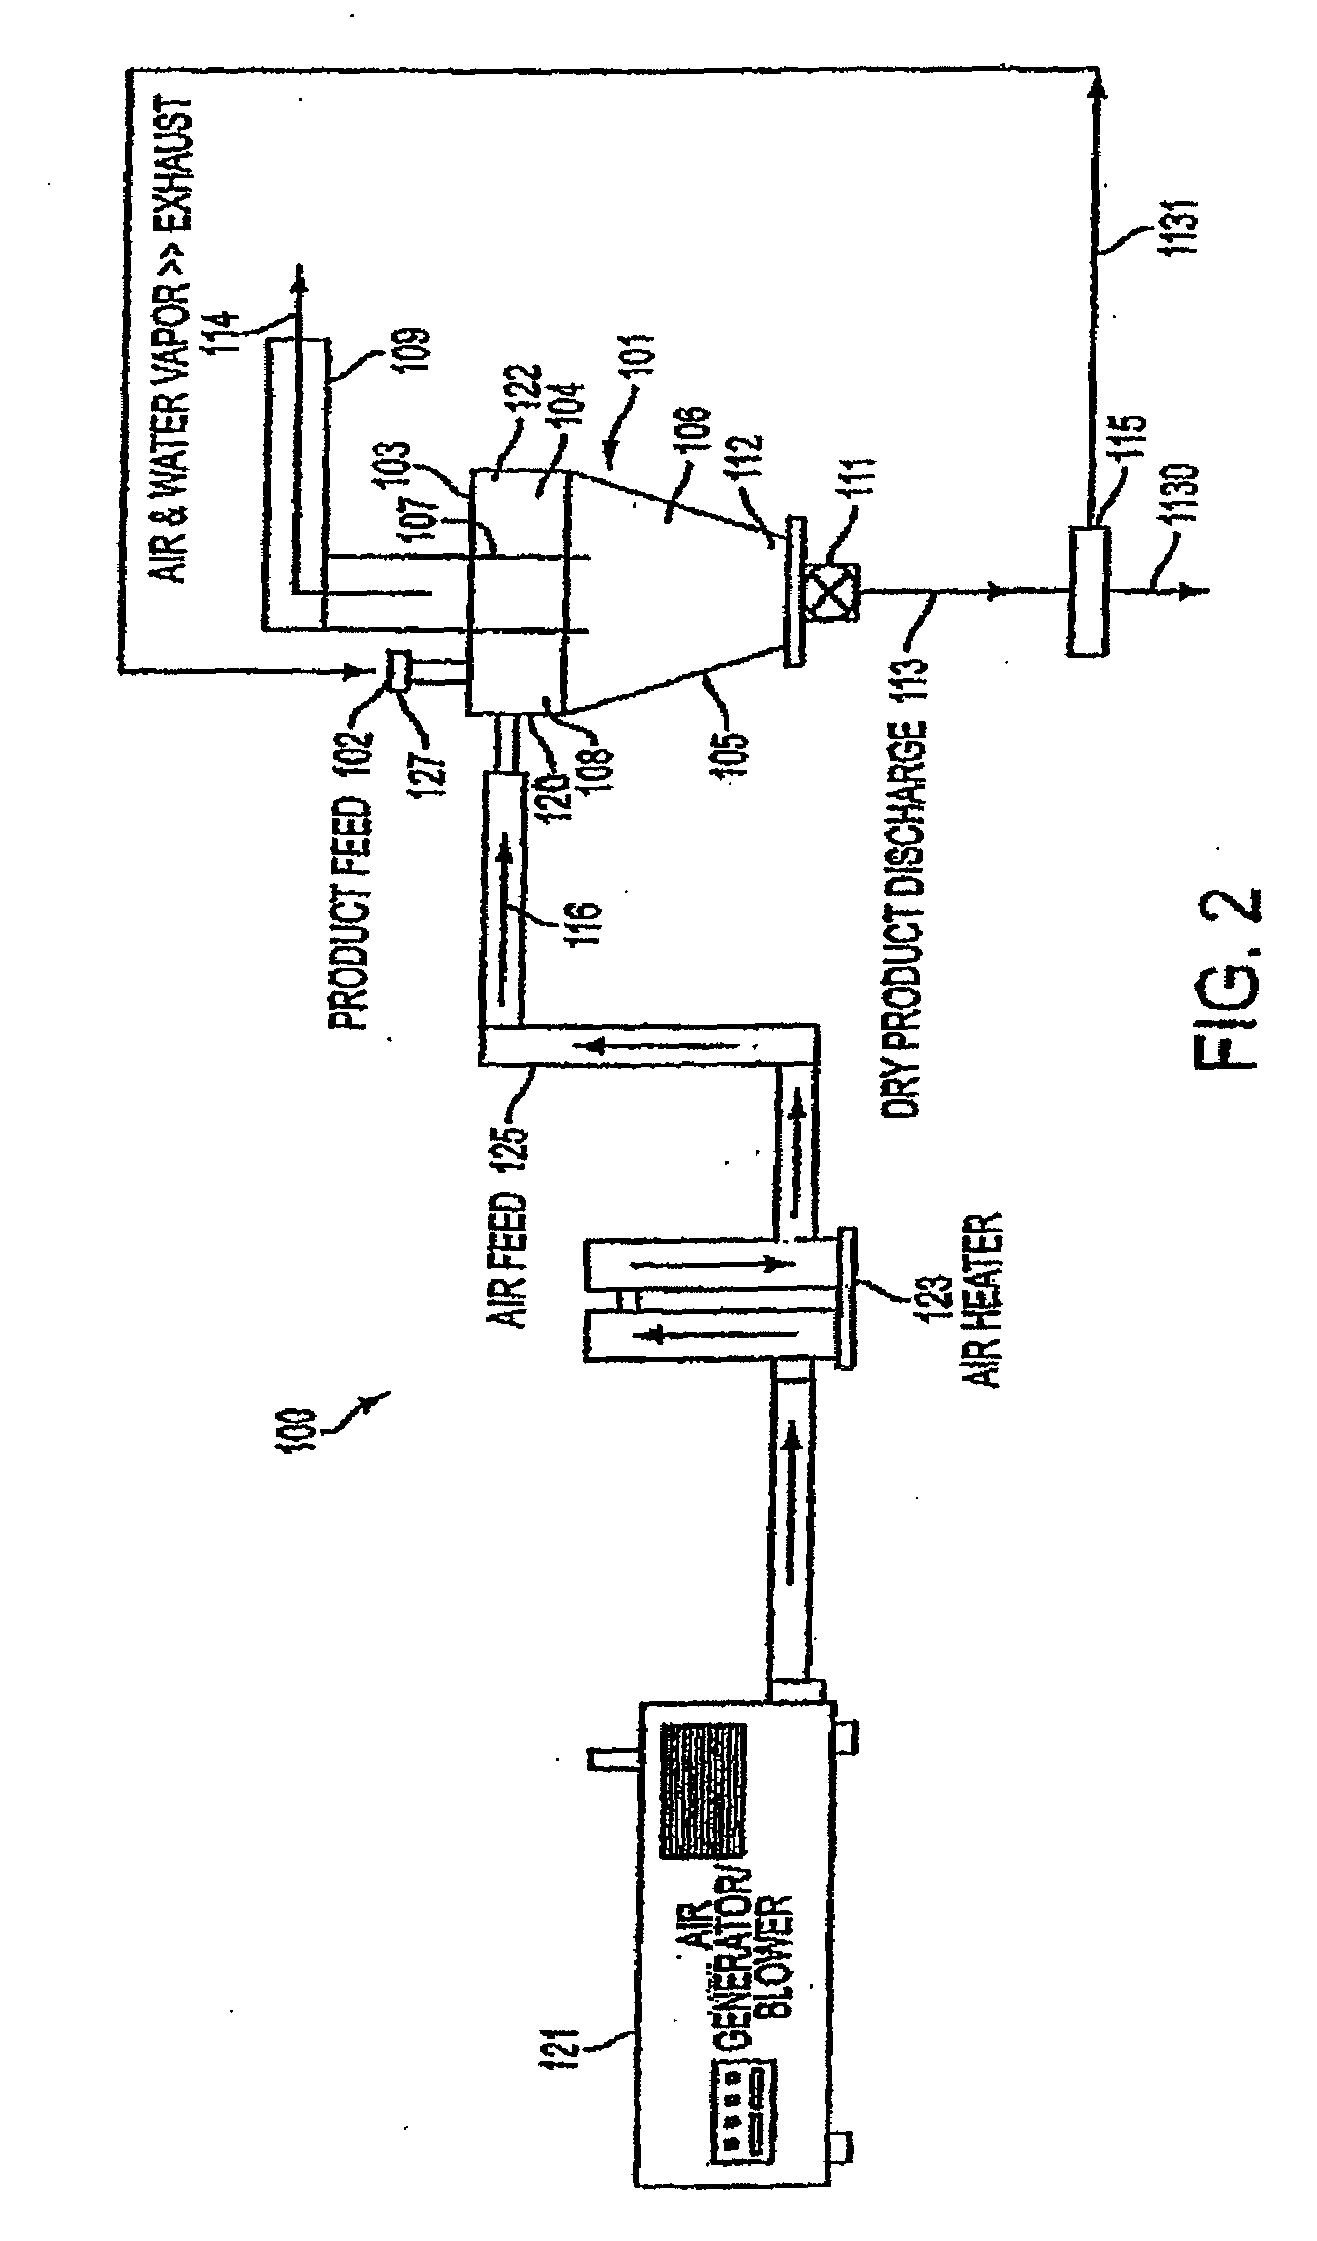 Process for Milling Cocoa Shells and Granular Edible Product Thereof